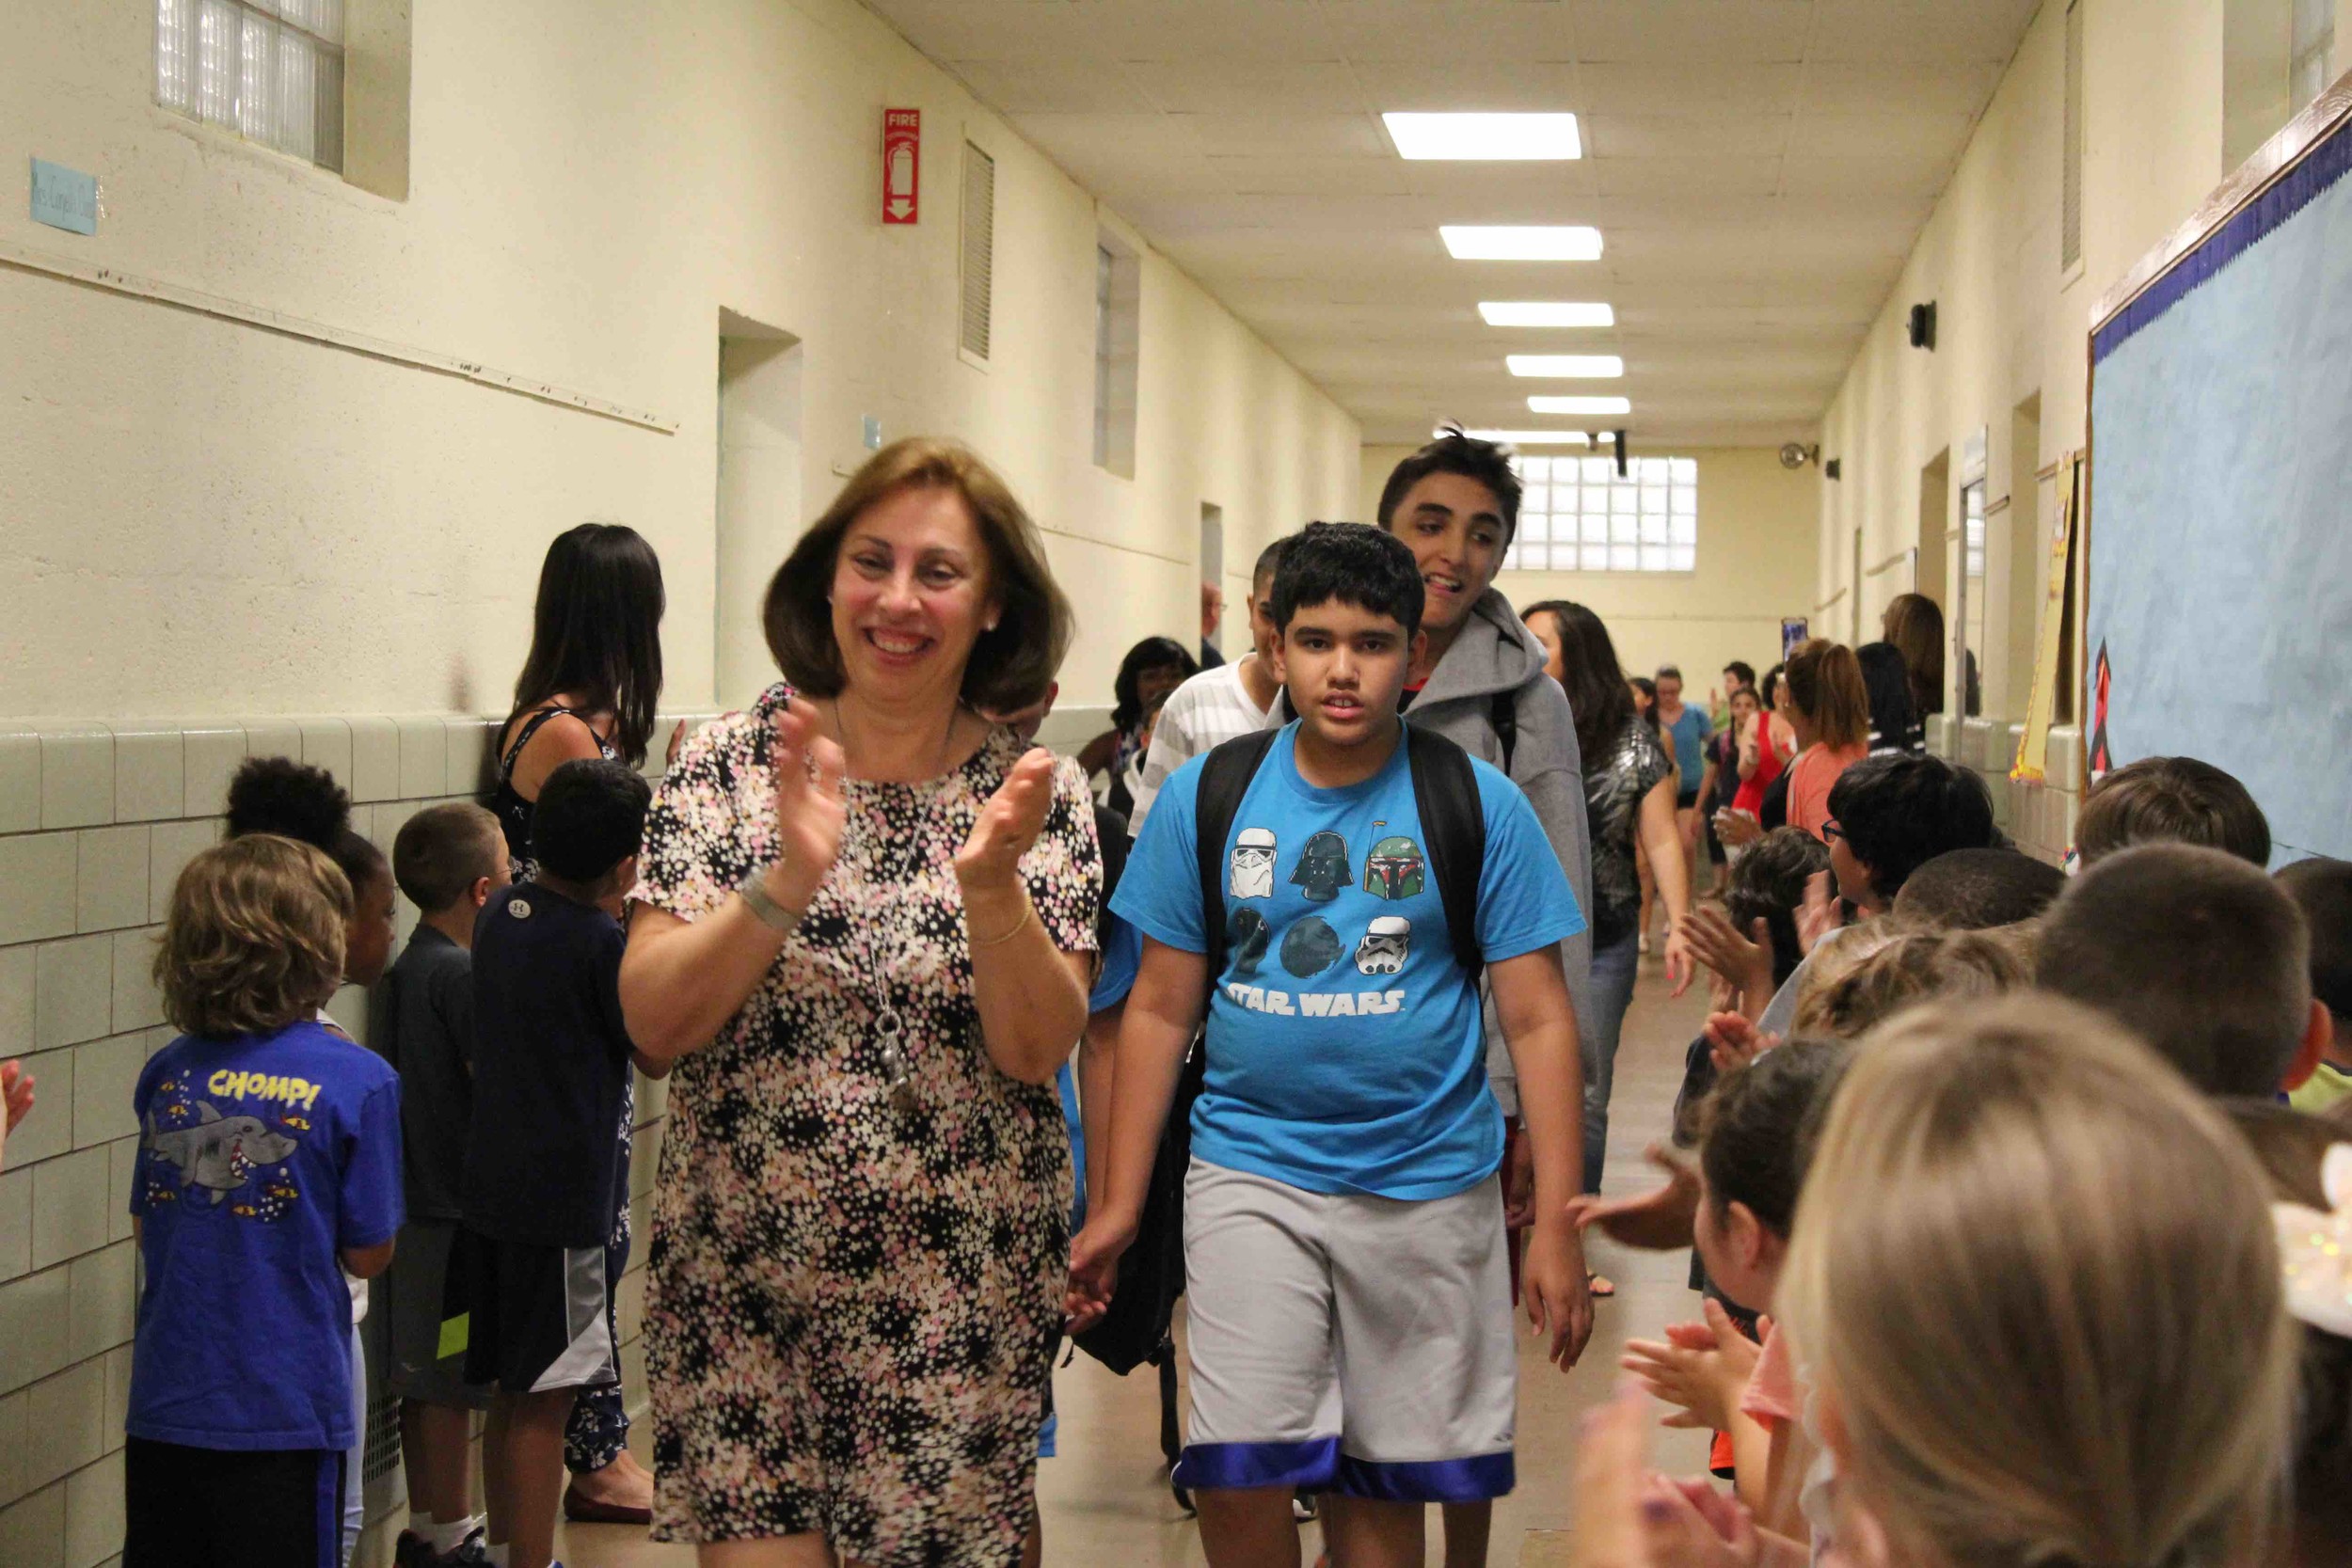 Stephanie Capozzoli led a procession of sixth-graders at the Willow Road School in June during the school’s end-of-year clap-out.